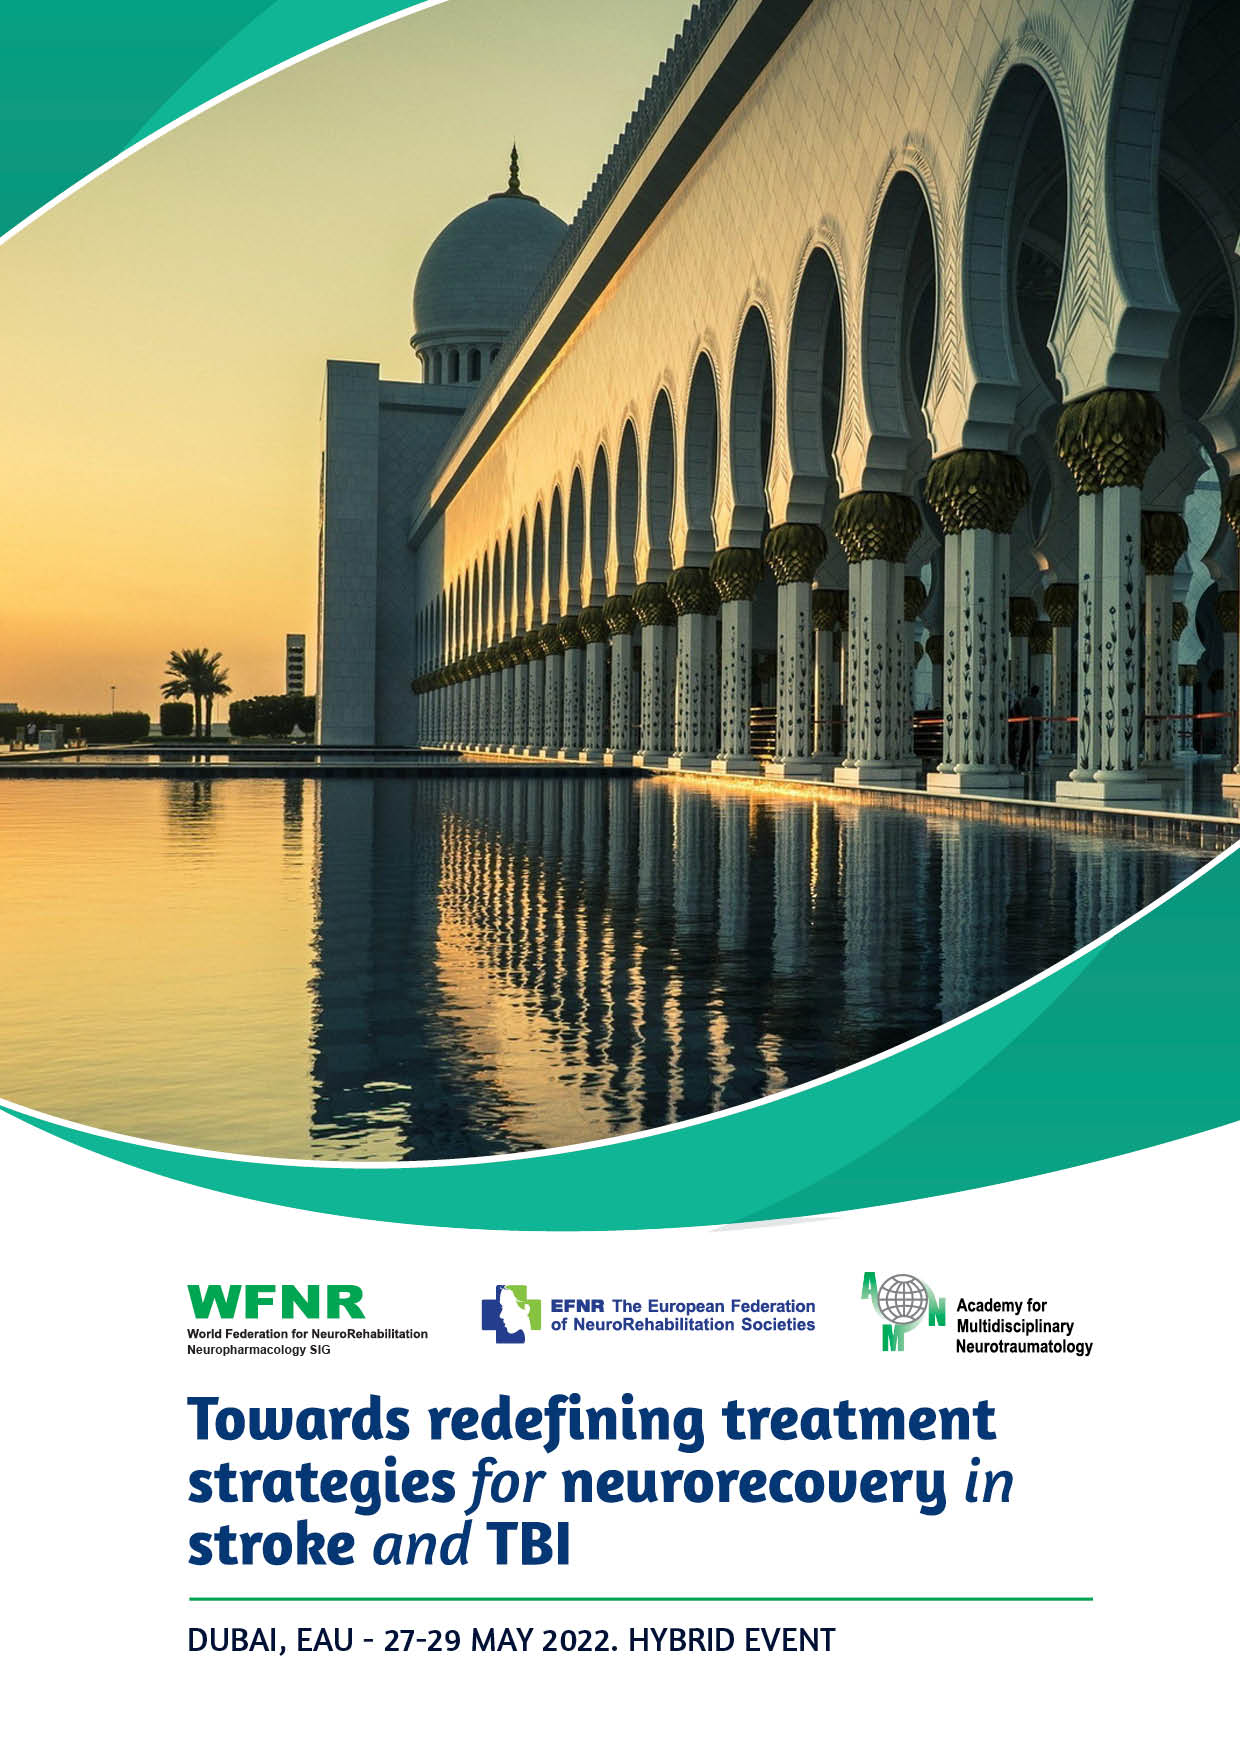 WFNR Webinar Series “Towards Redifining Treatment Strategies for Neurorecovery in Stroke and TBI”, 2022